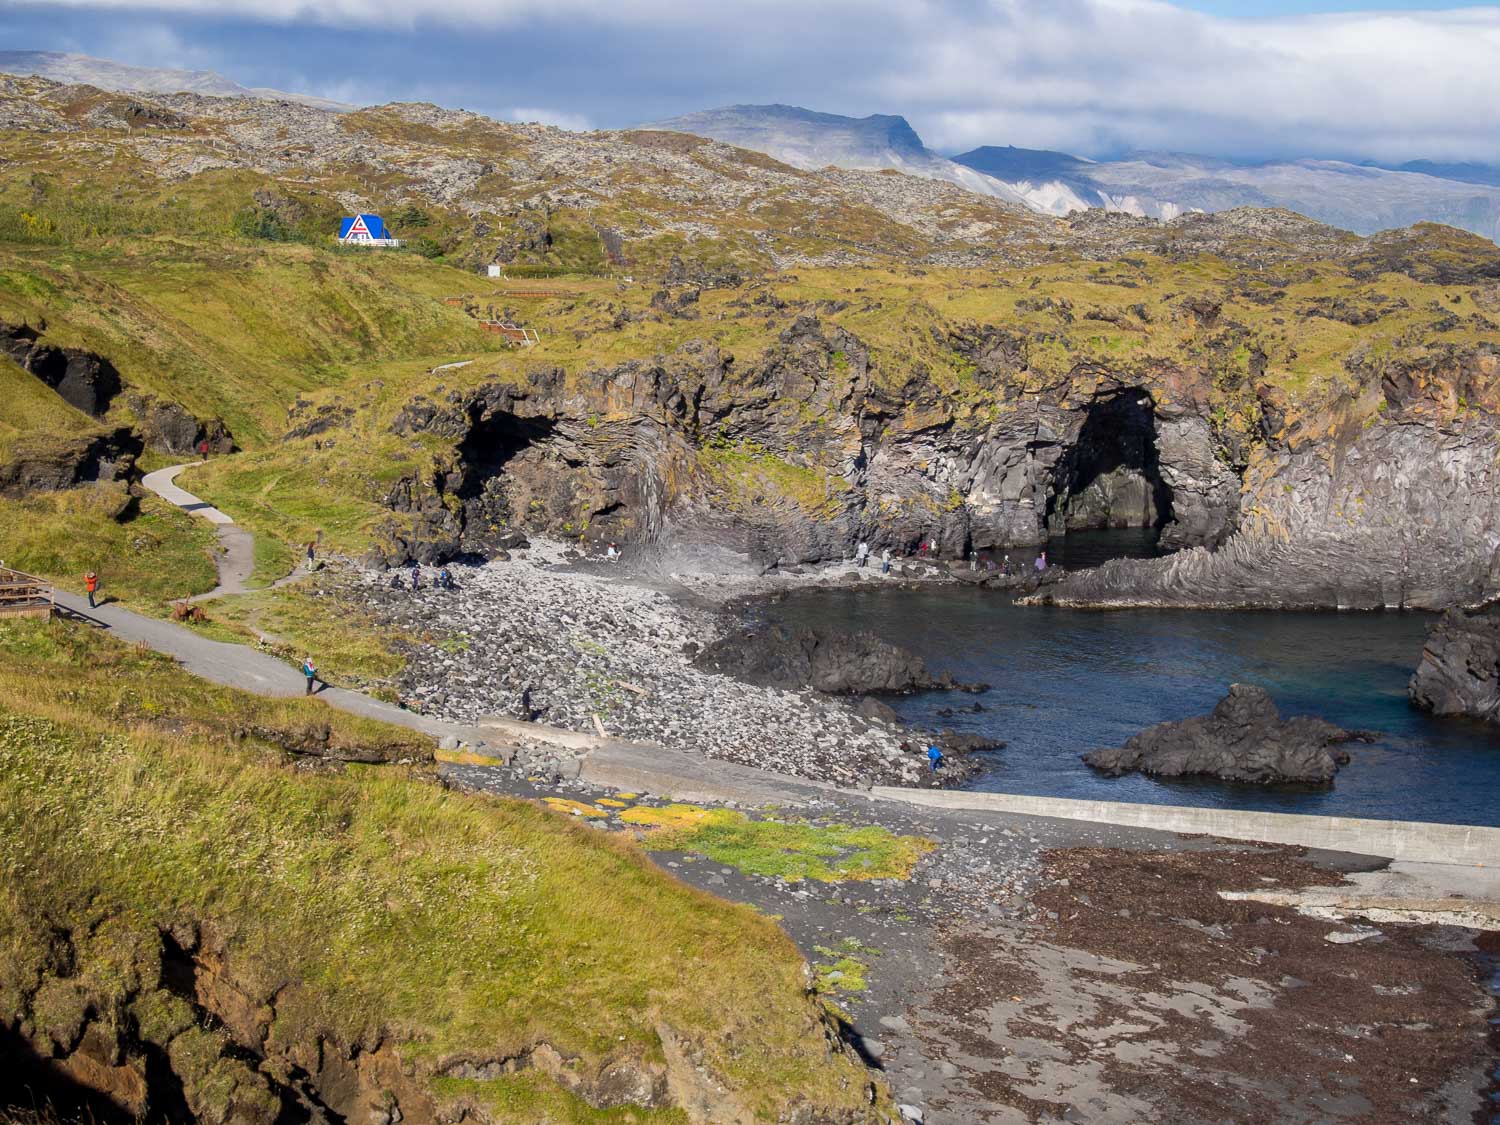 Snaefellsnes Peninsula Iceland travel guide - the best things to do in Snaefellsness from volcanoes to lava fields, waterfalls to glaciers.